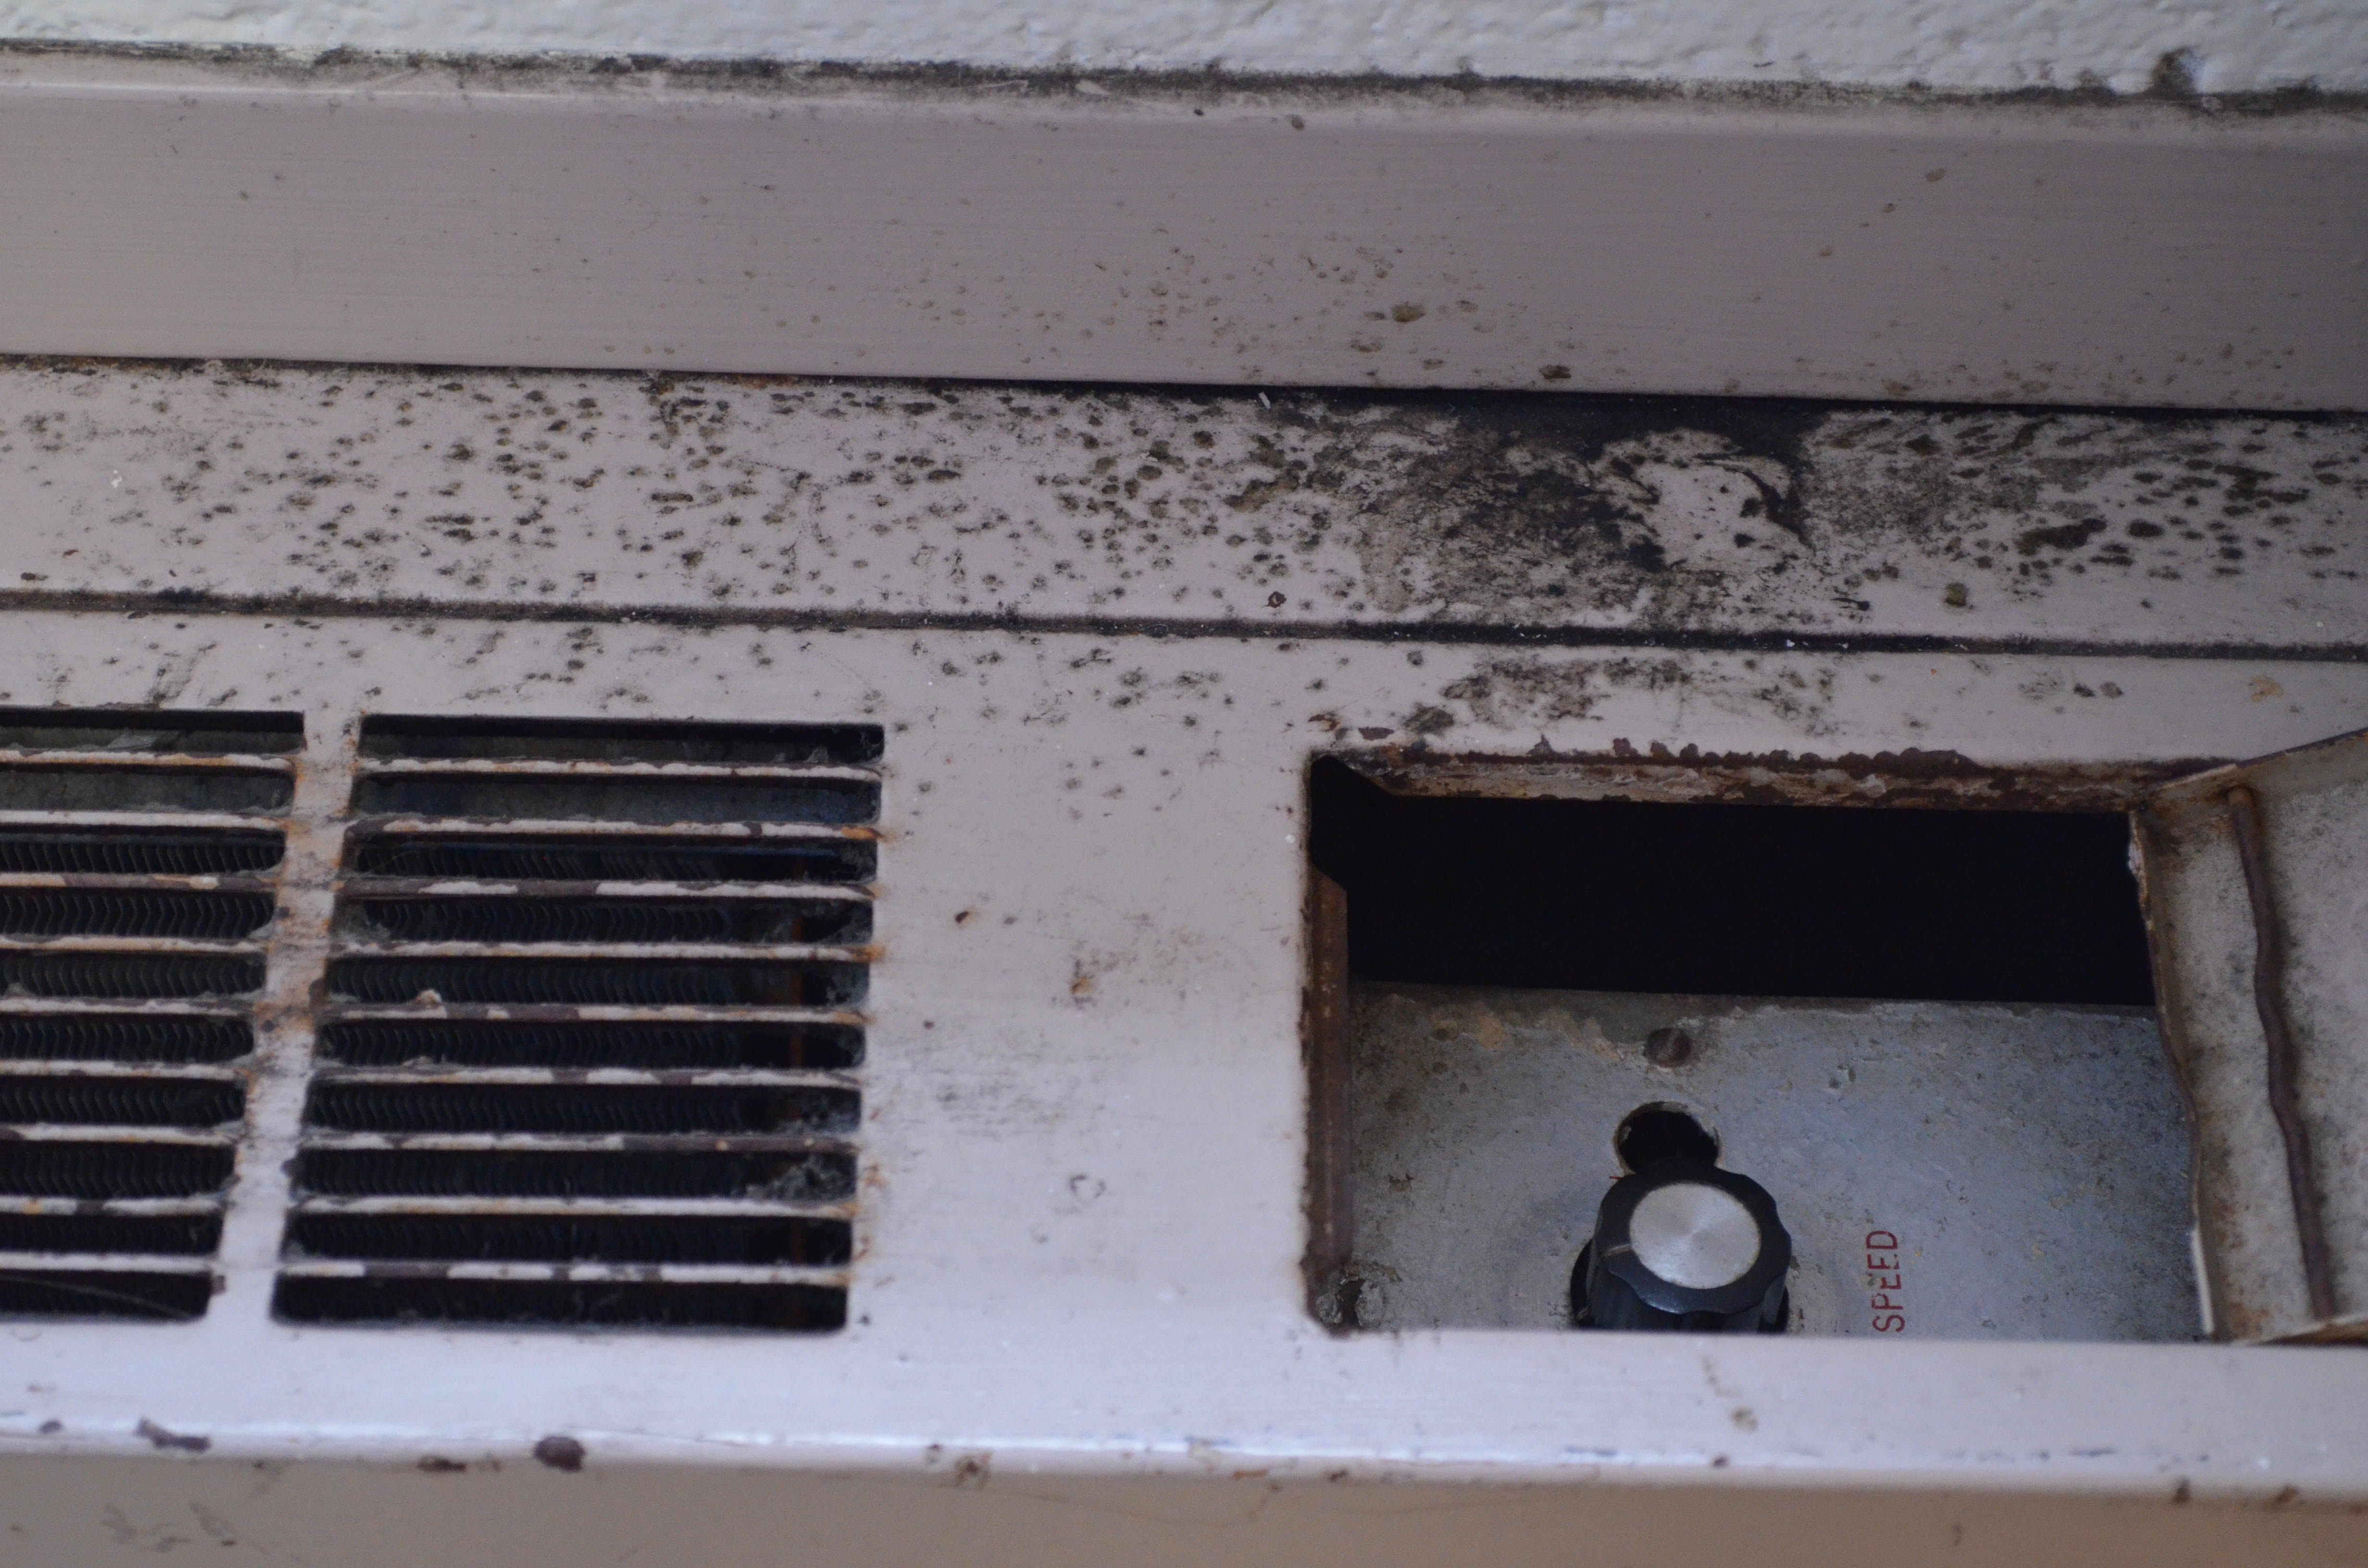 Mold, mildew and leaks: what’s next?